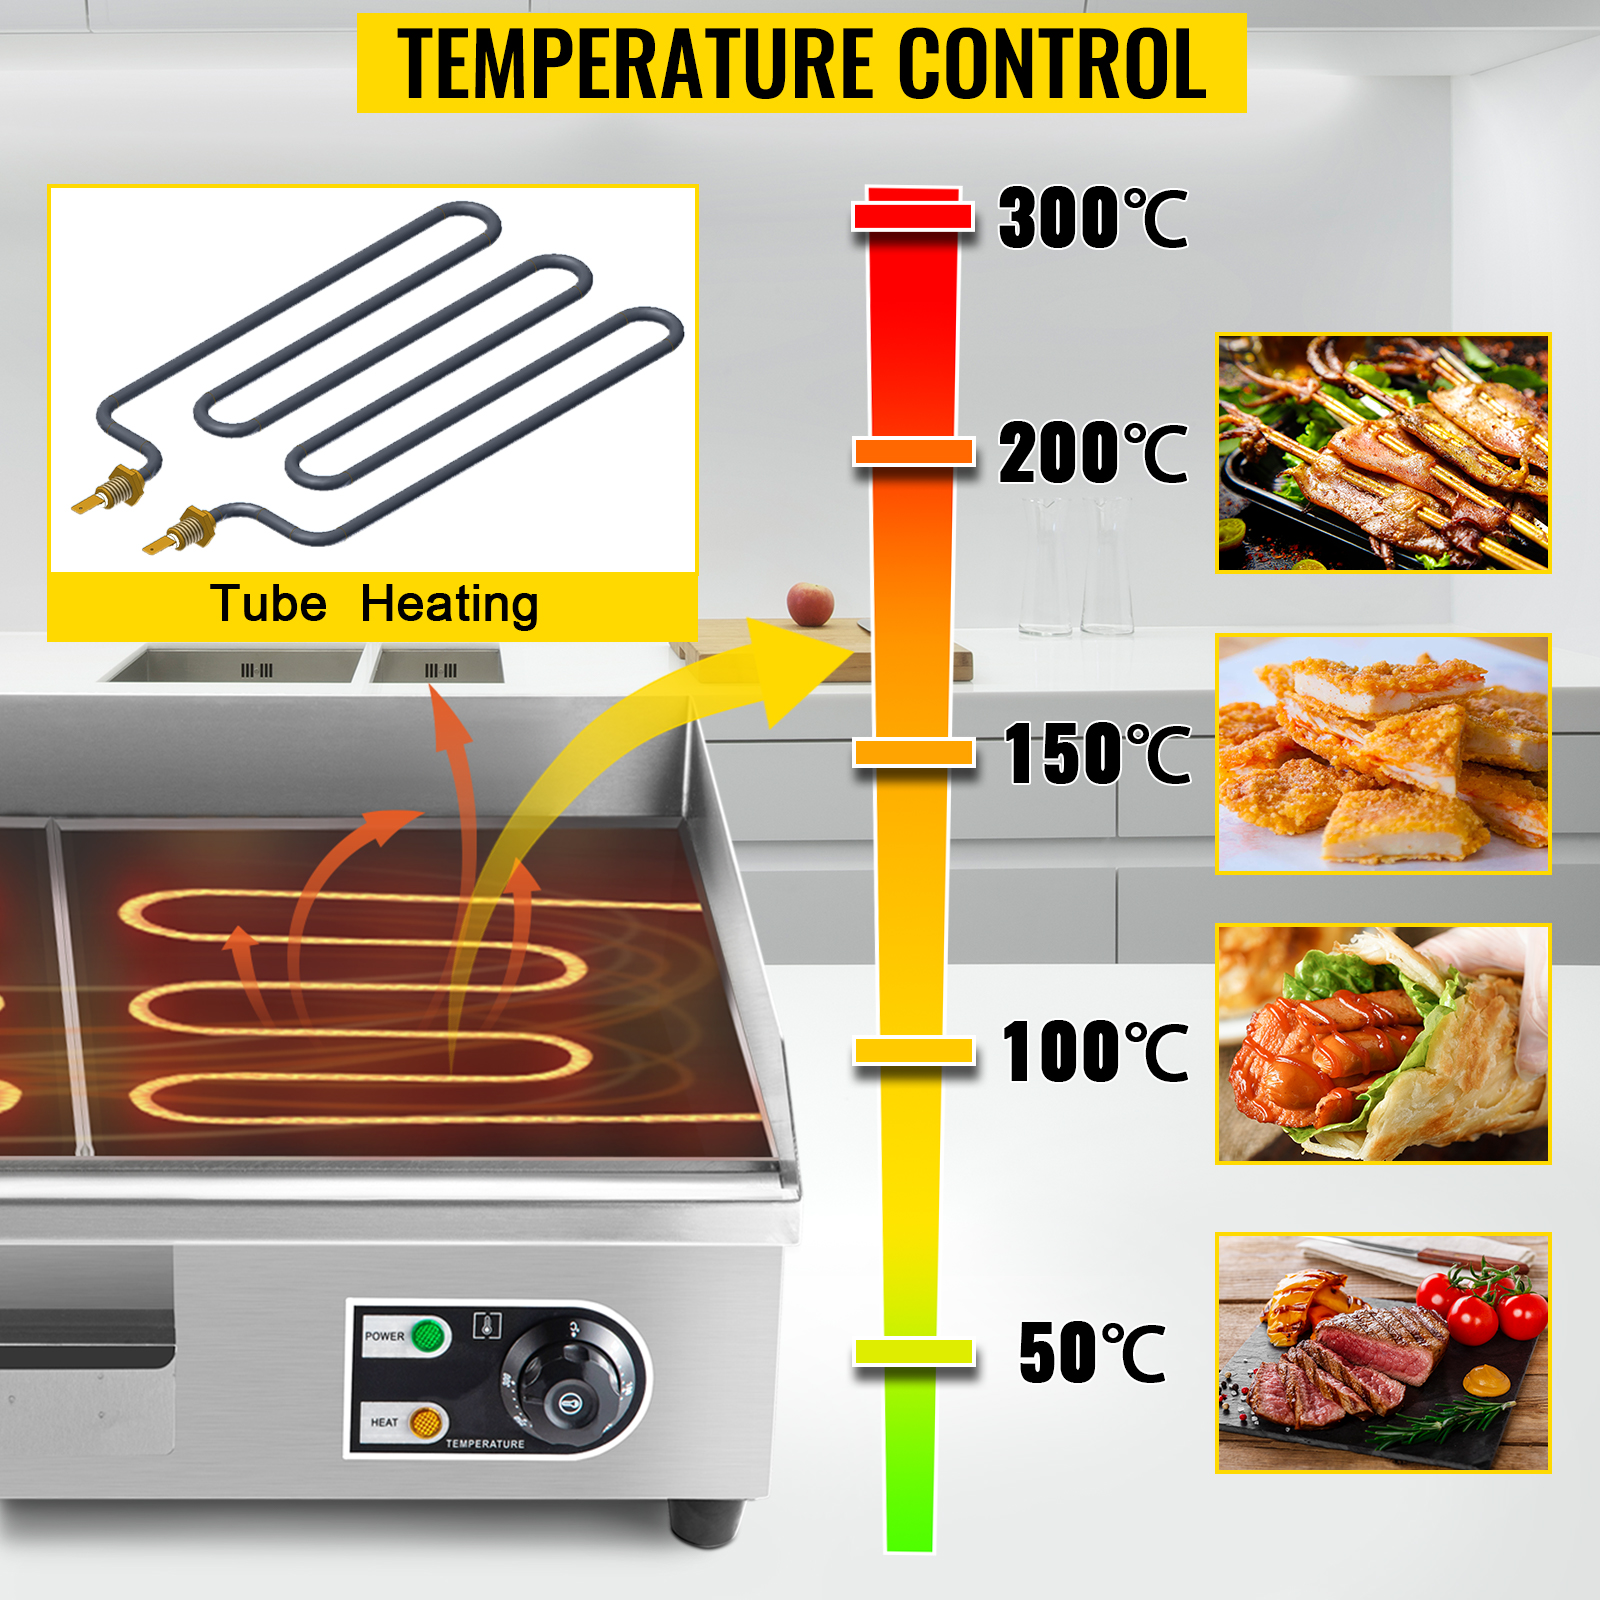 70 cm Commercial Kitchen Catering Electric Countertop Tabletop Flat Top Restaurant Grill Hot Plate BBQ Stove Cooktop Manual Griddle 220V Adjustable Temp Control Professional 28 